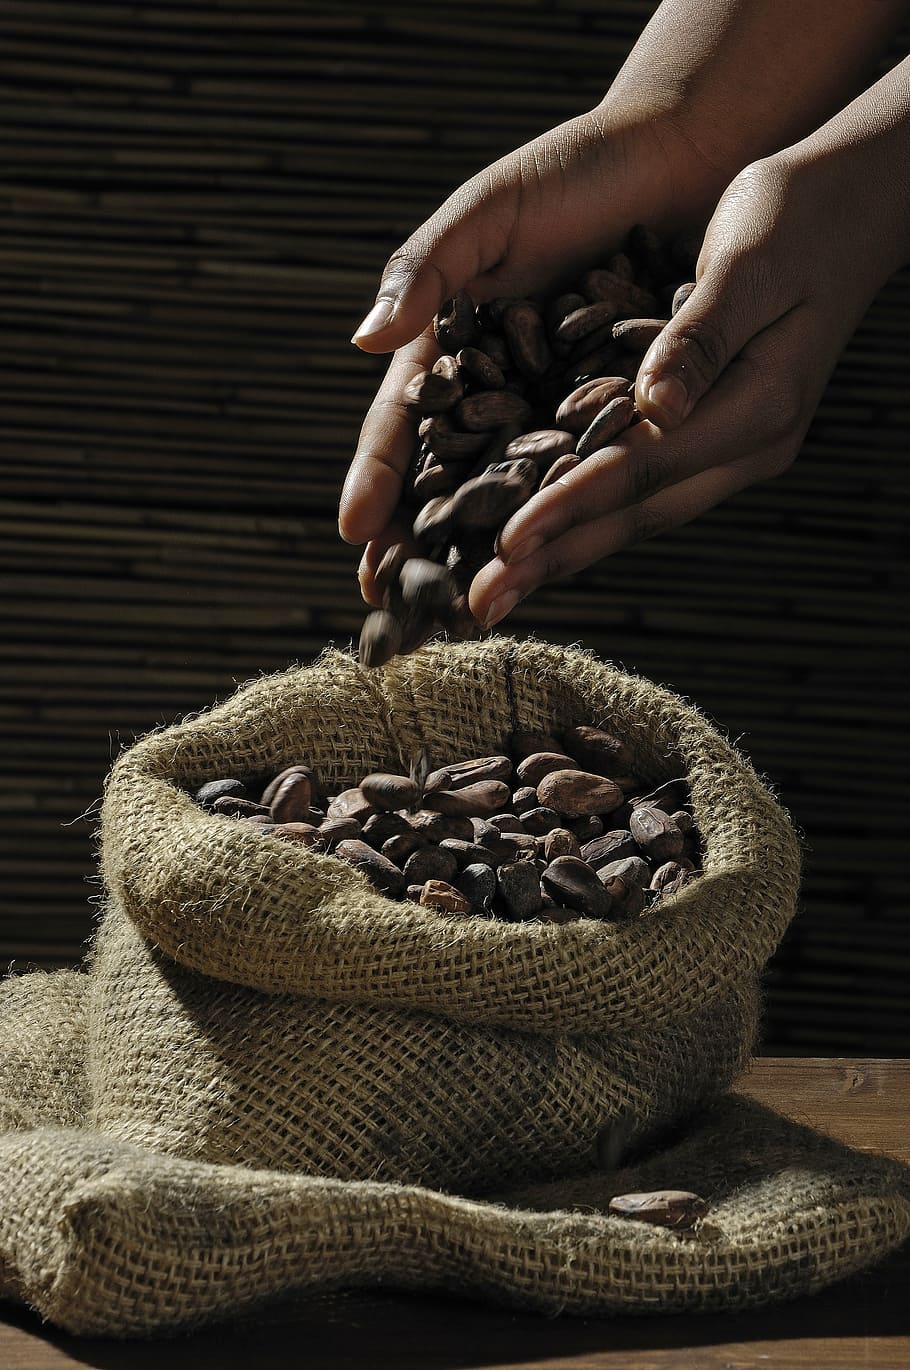 person, holding, brown, seeds, cocoa beans, cocoa, cacao, candy, chocolate, human hand